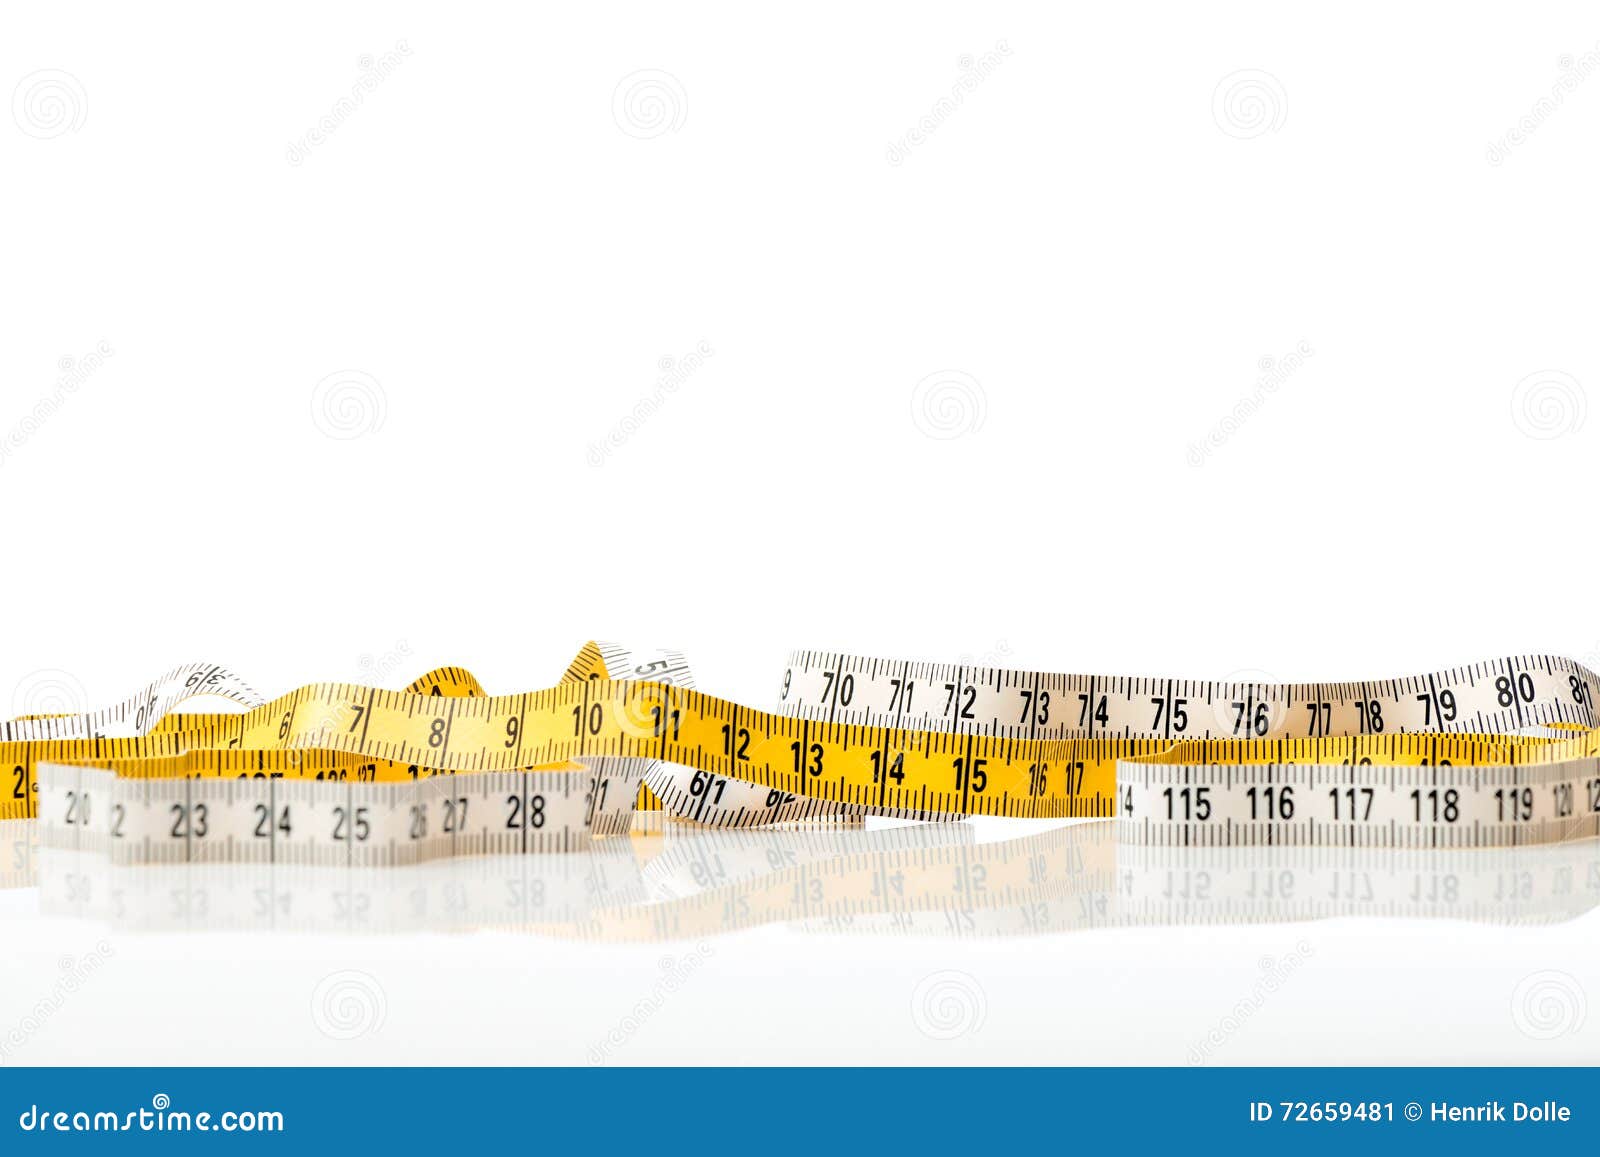 https://thumbs.dreamstime.com/z/yellow-white-measure-tape-tailor-to-take-measurements-72659481.jpg